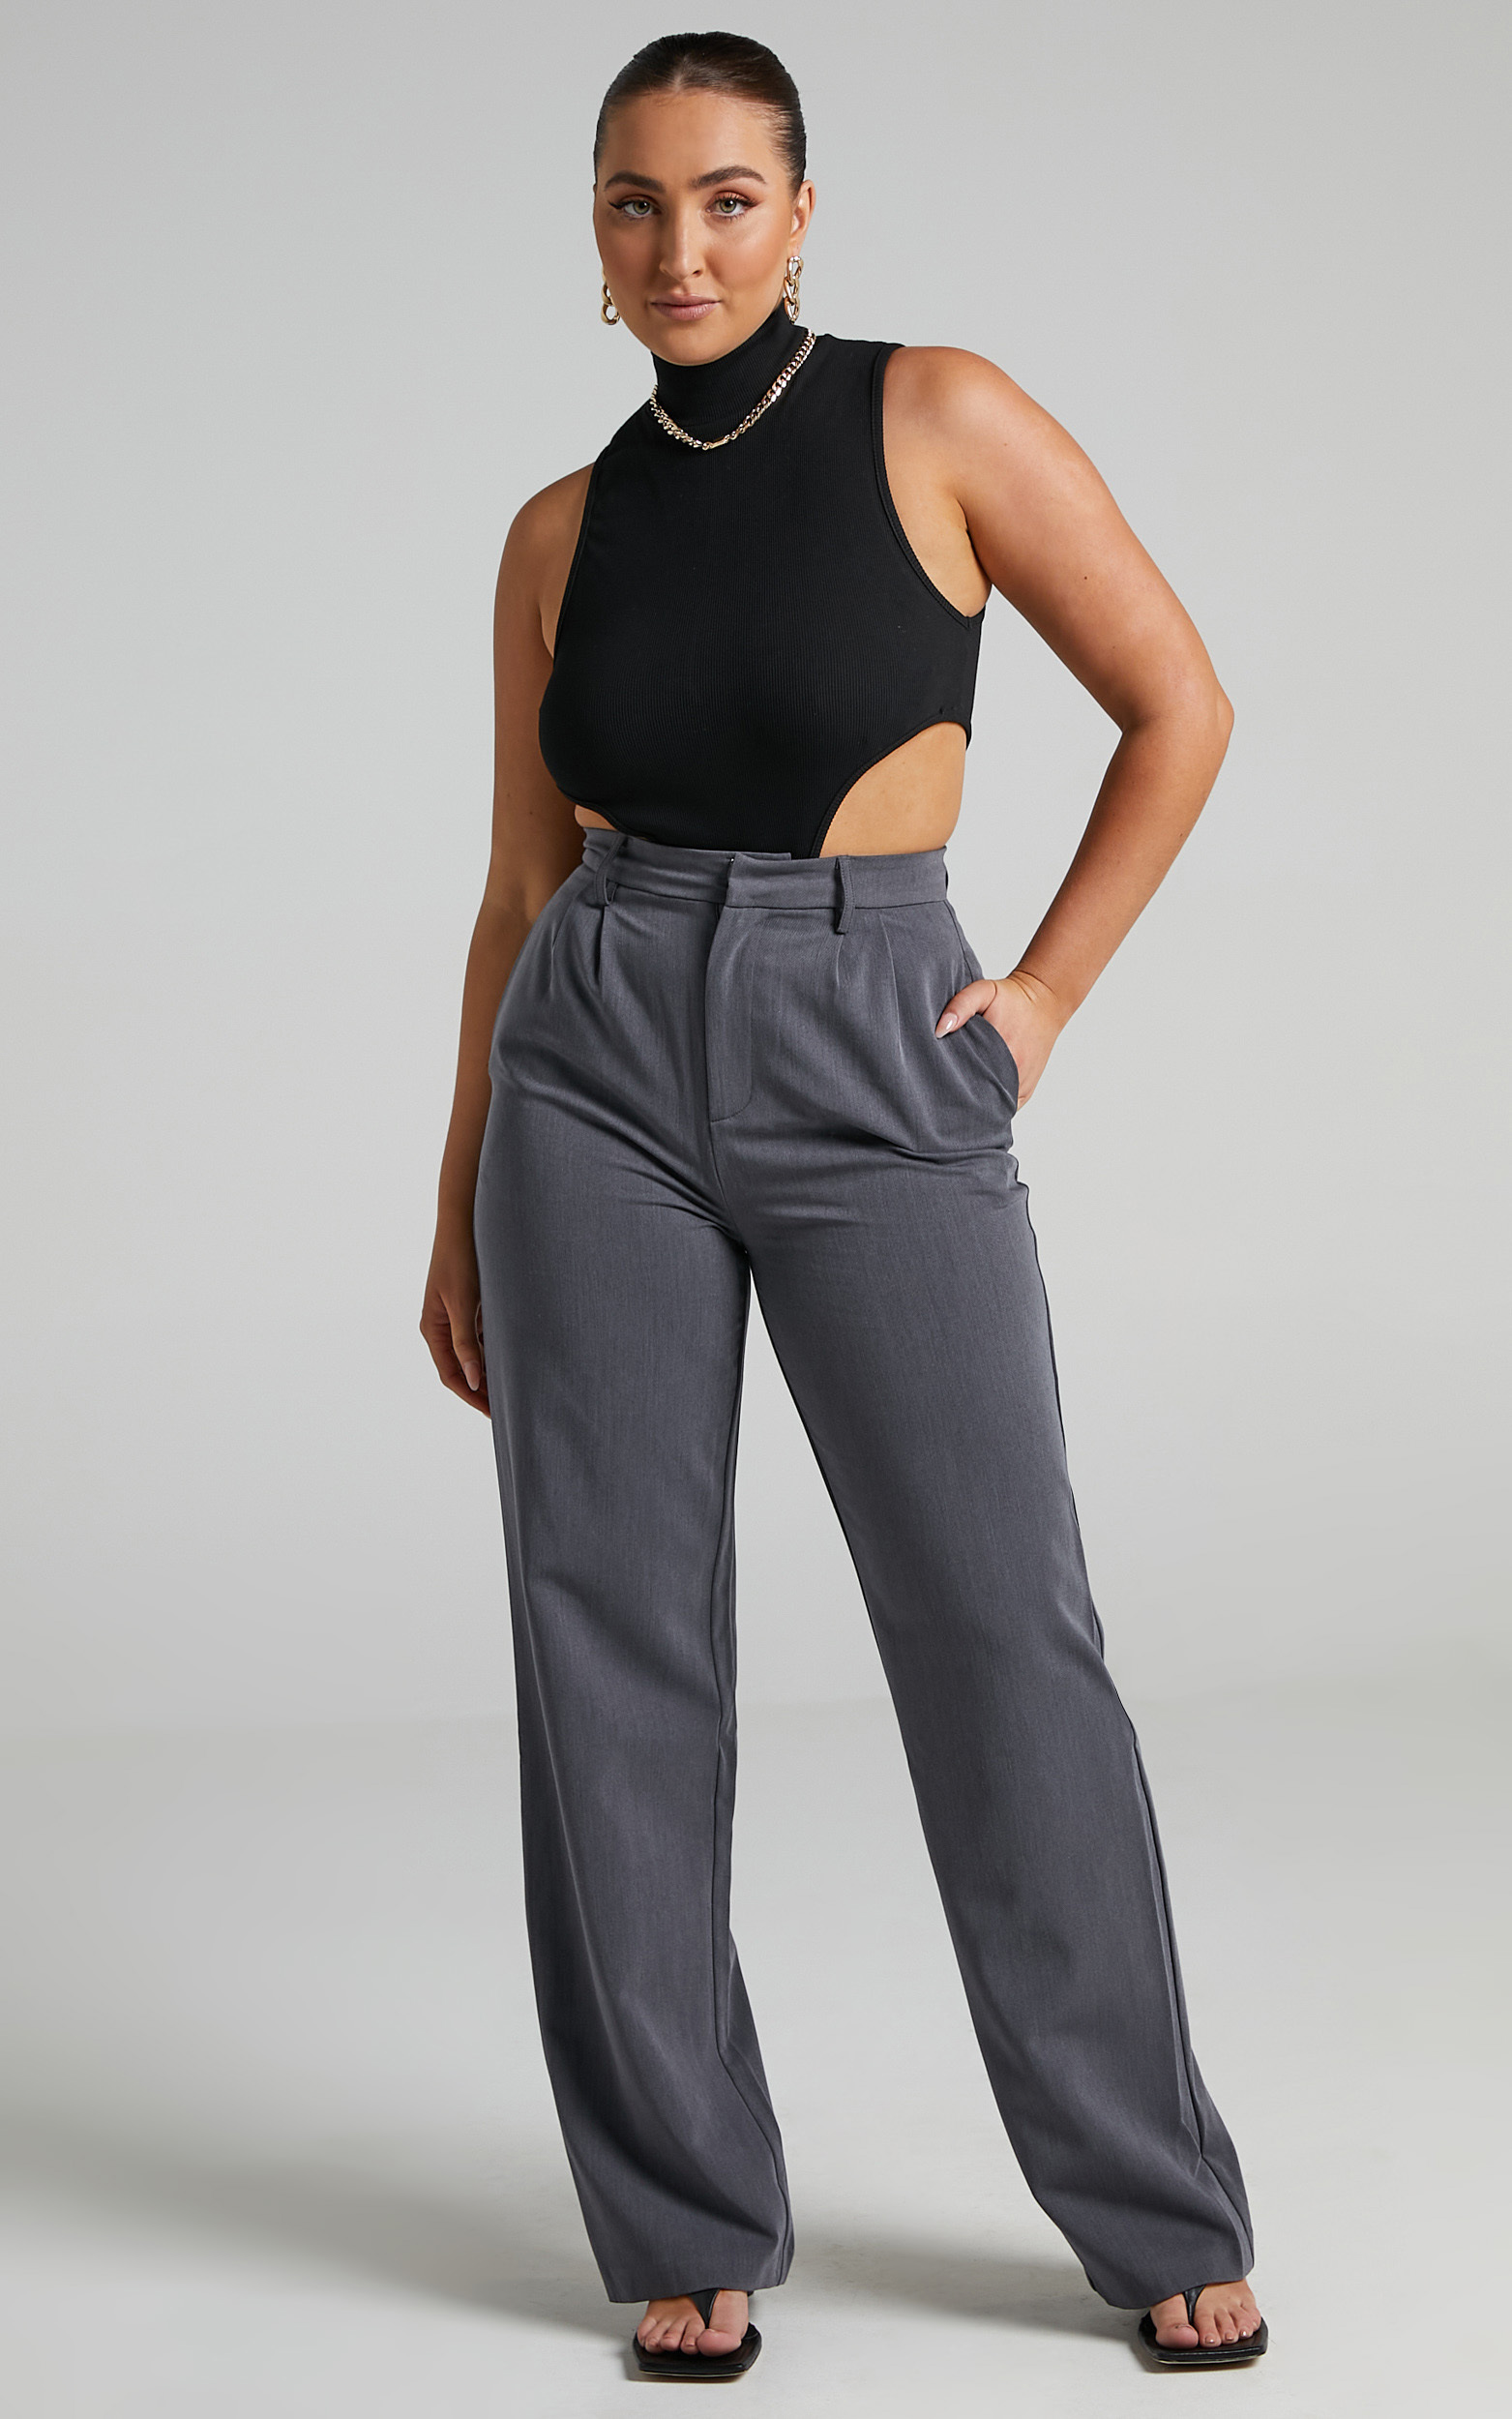 Lorcan High Waisted Tailored Pants in Charcoal - 04, GRY2, hi-res image number null